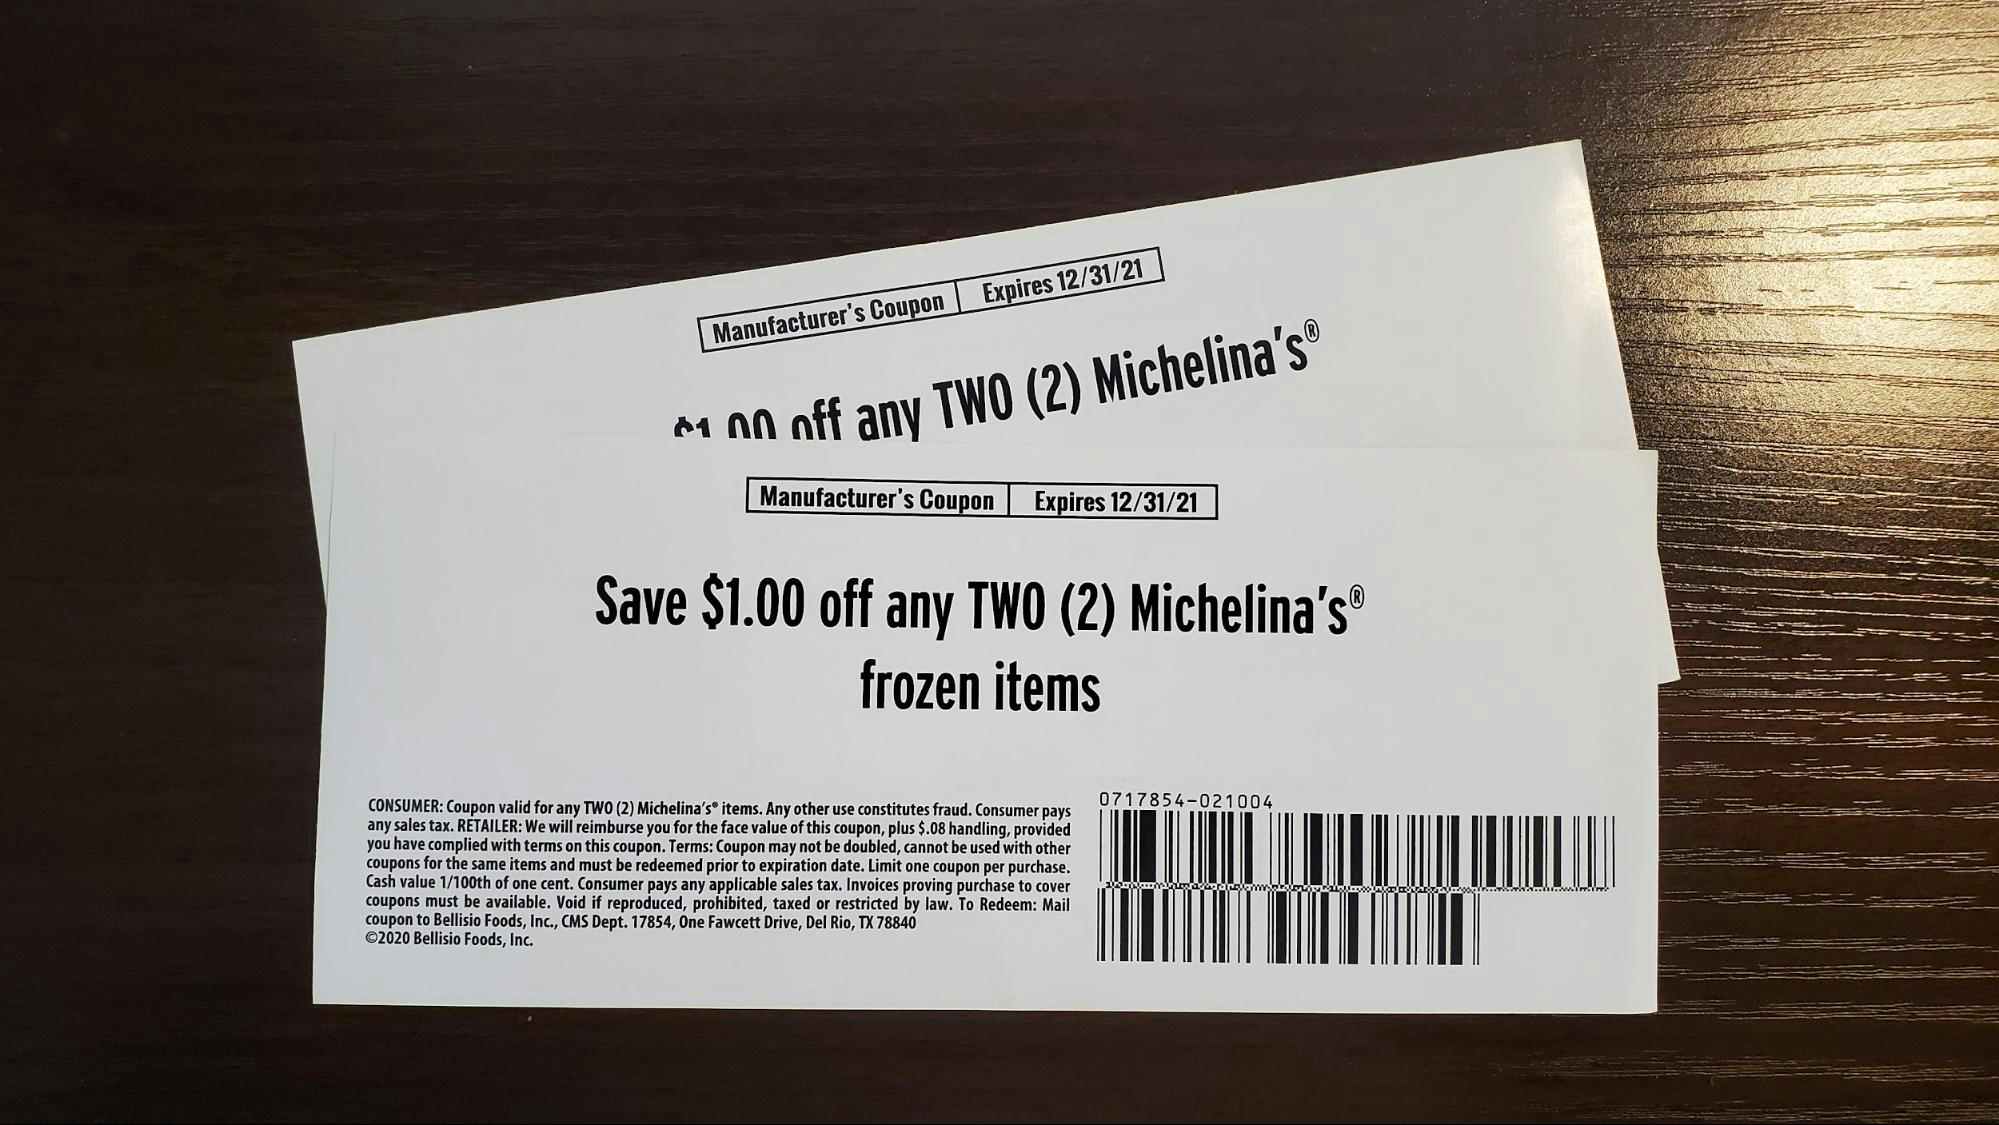 49 Companies That'll Send You Free Coupons by Mail - The Krazy Coupon Lady